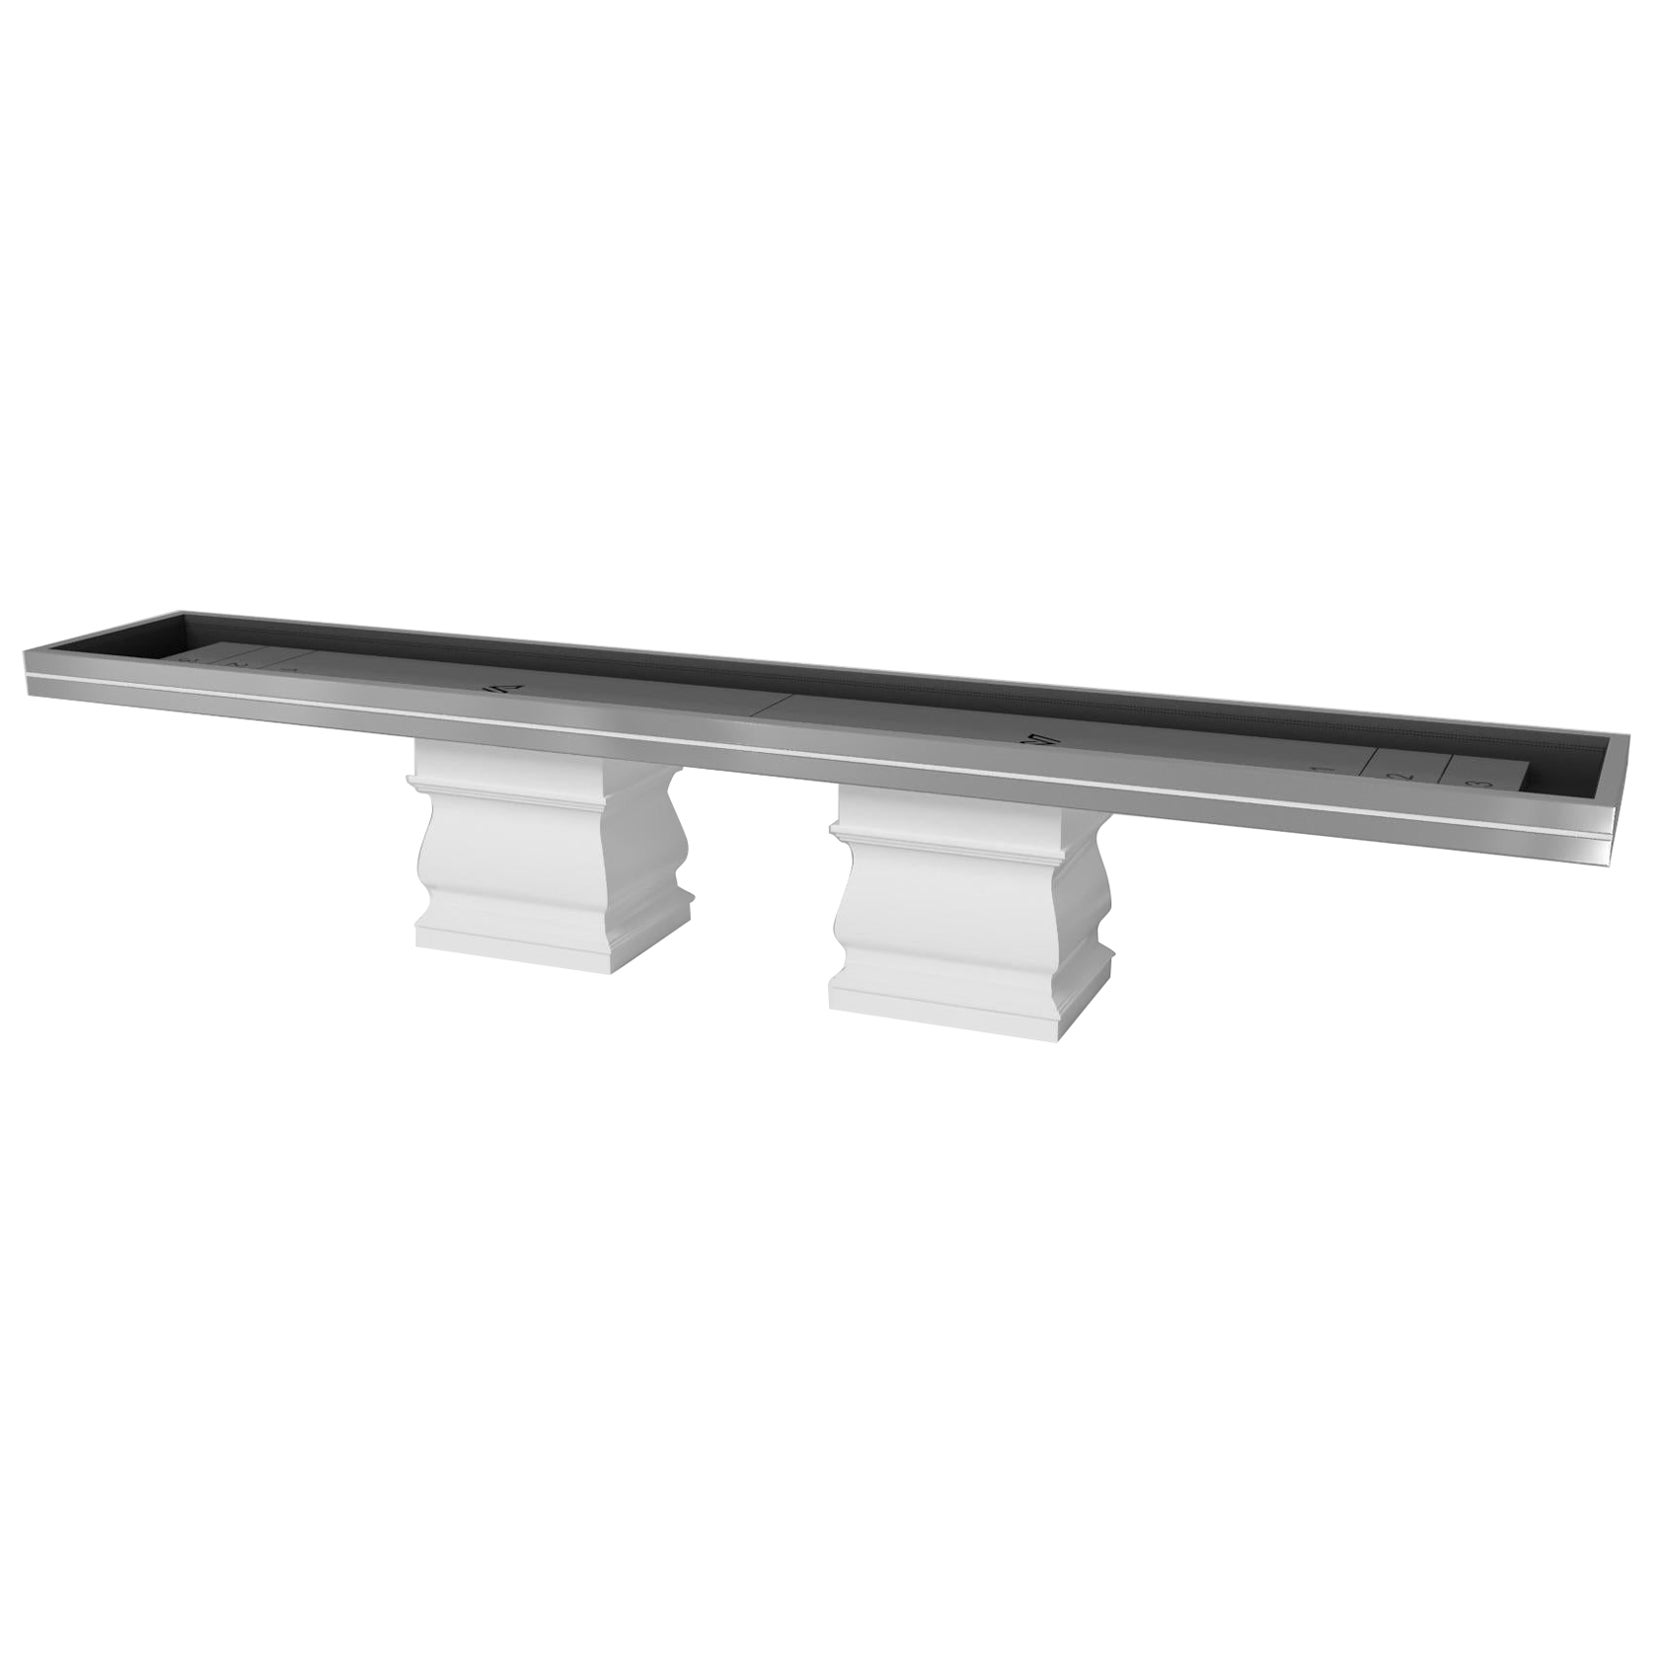 Elevate Customs Baluster Shuffleboard / Stainless Steel Sheet Metal in 14' - USA For Sale